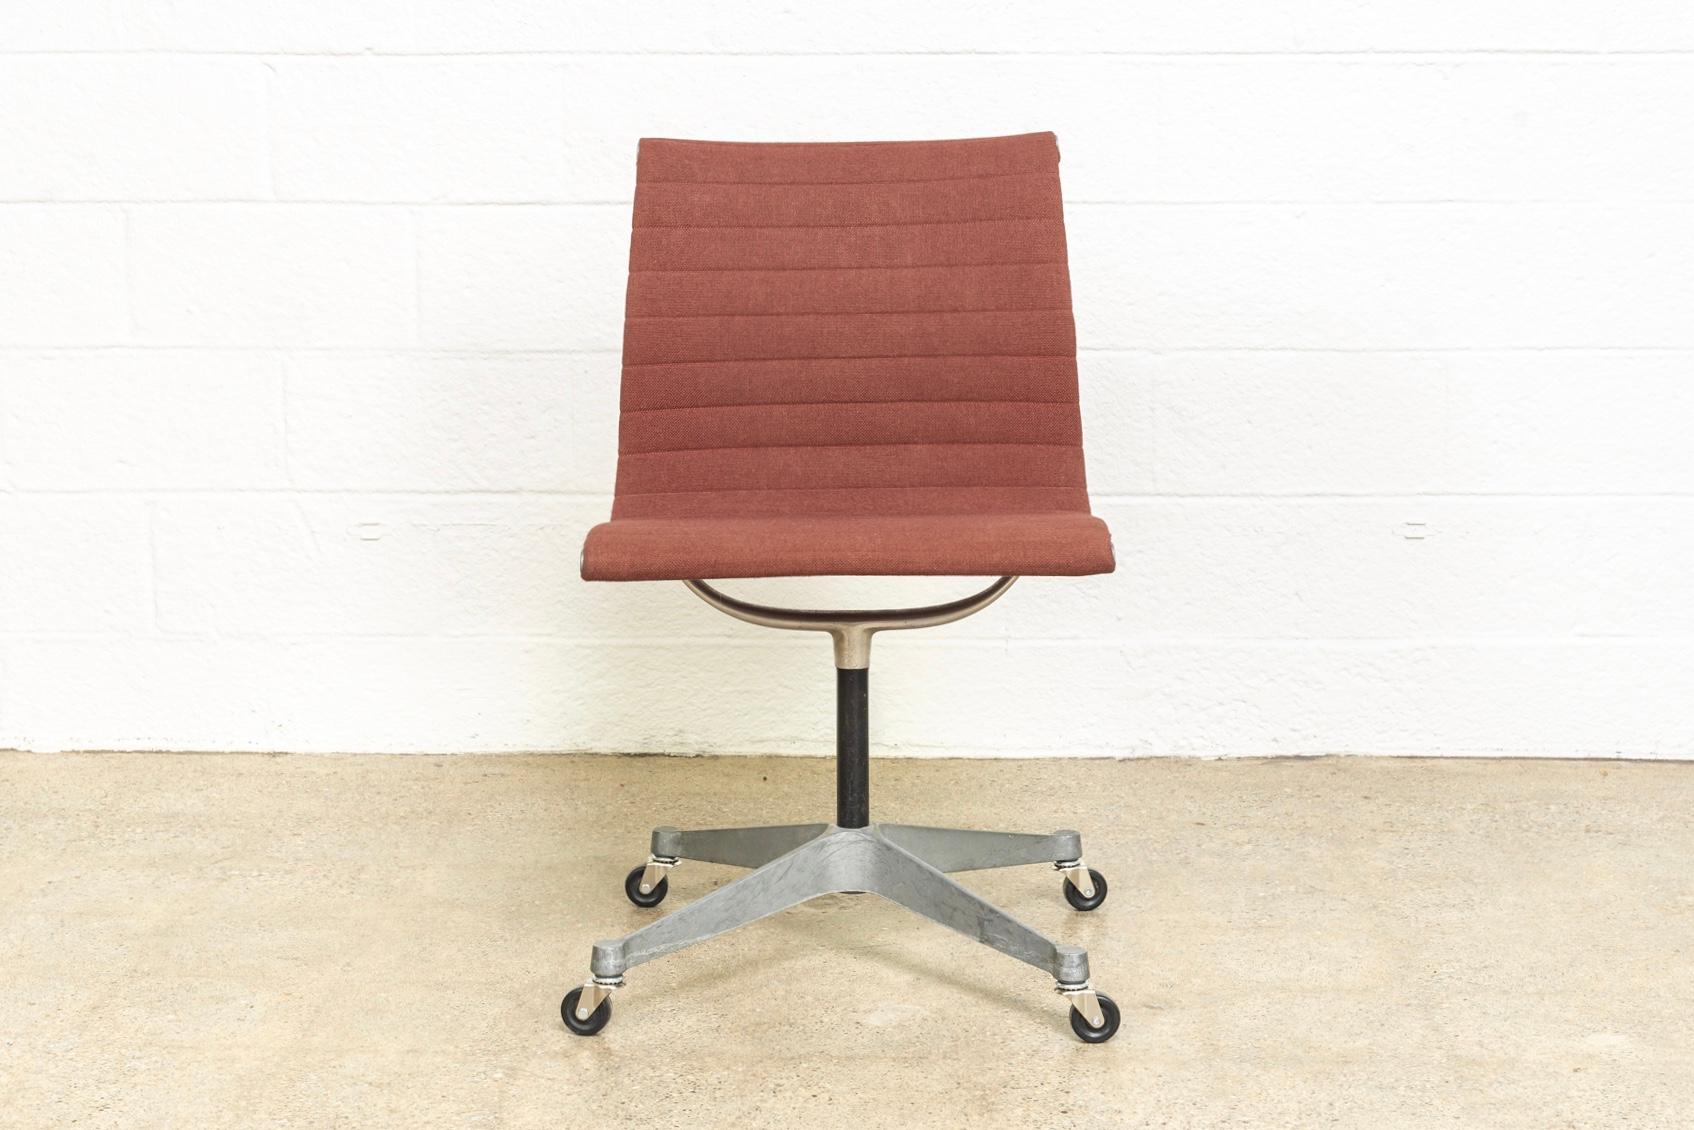 This vintage Classic Charles and Ray Eames for Herman Miller Aluminum Group Management side chair has a clean and refined design with curvilinear lines and elegant profile. It features a cast aluminum frame and 4-star contract base with rolling